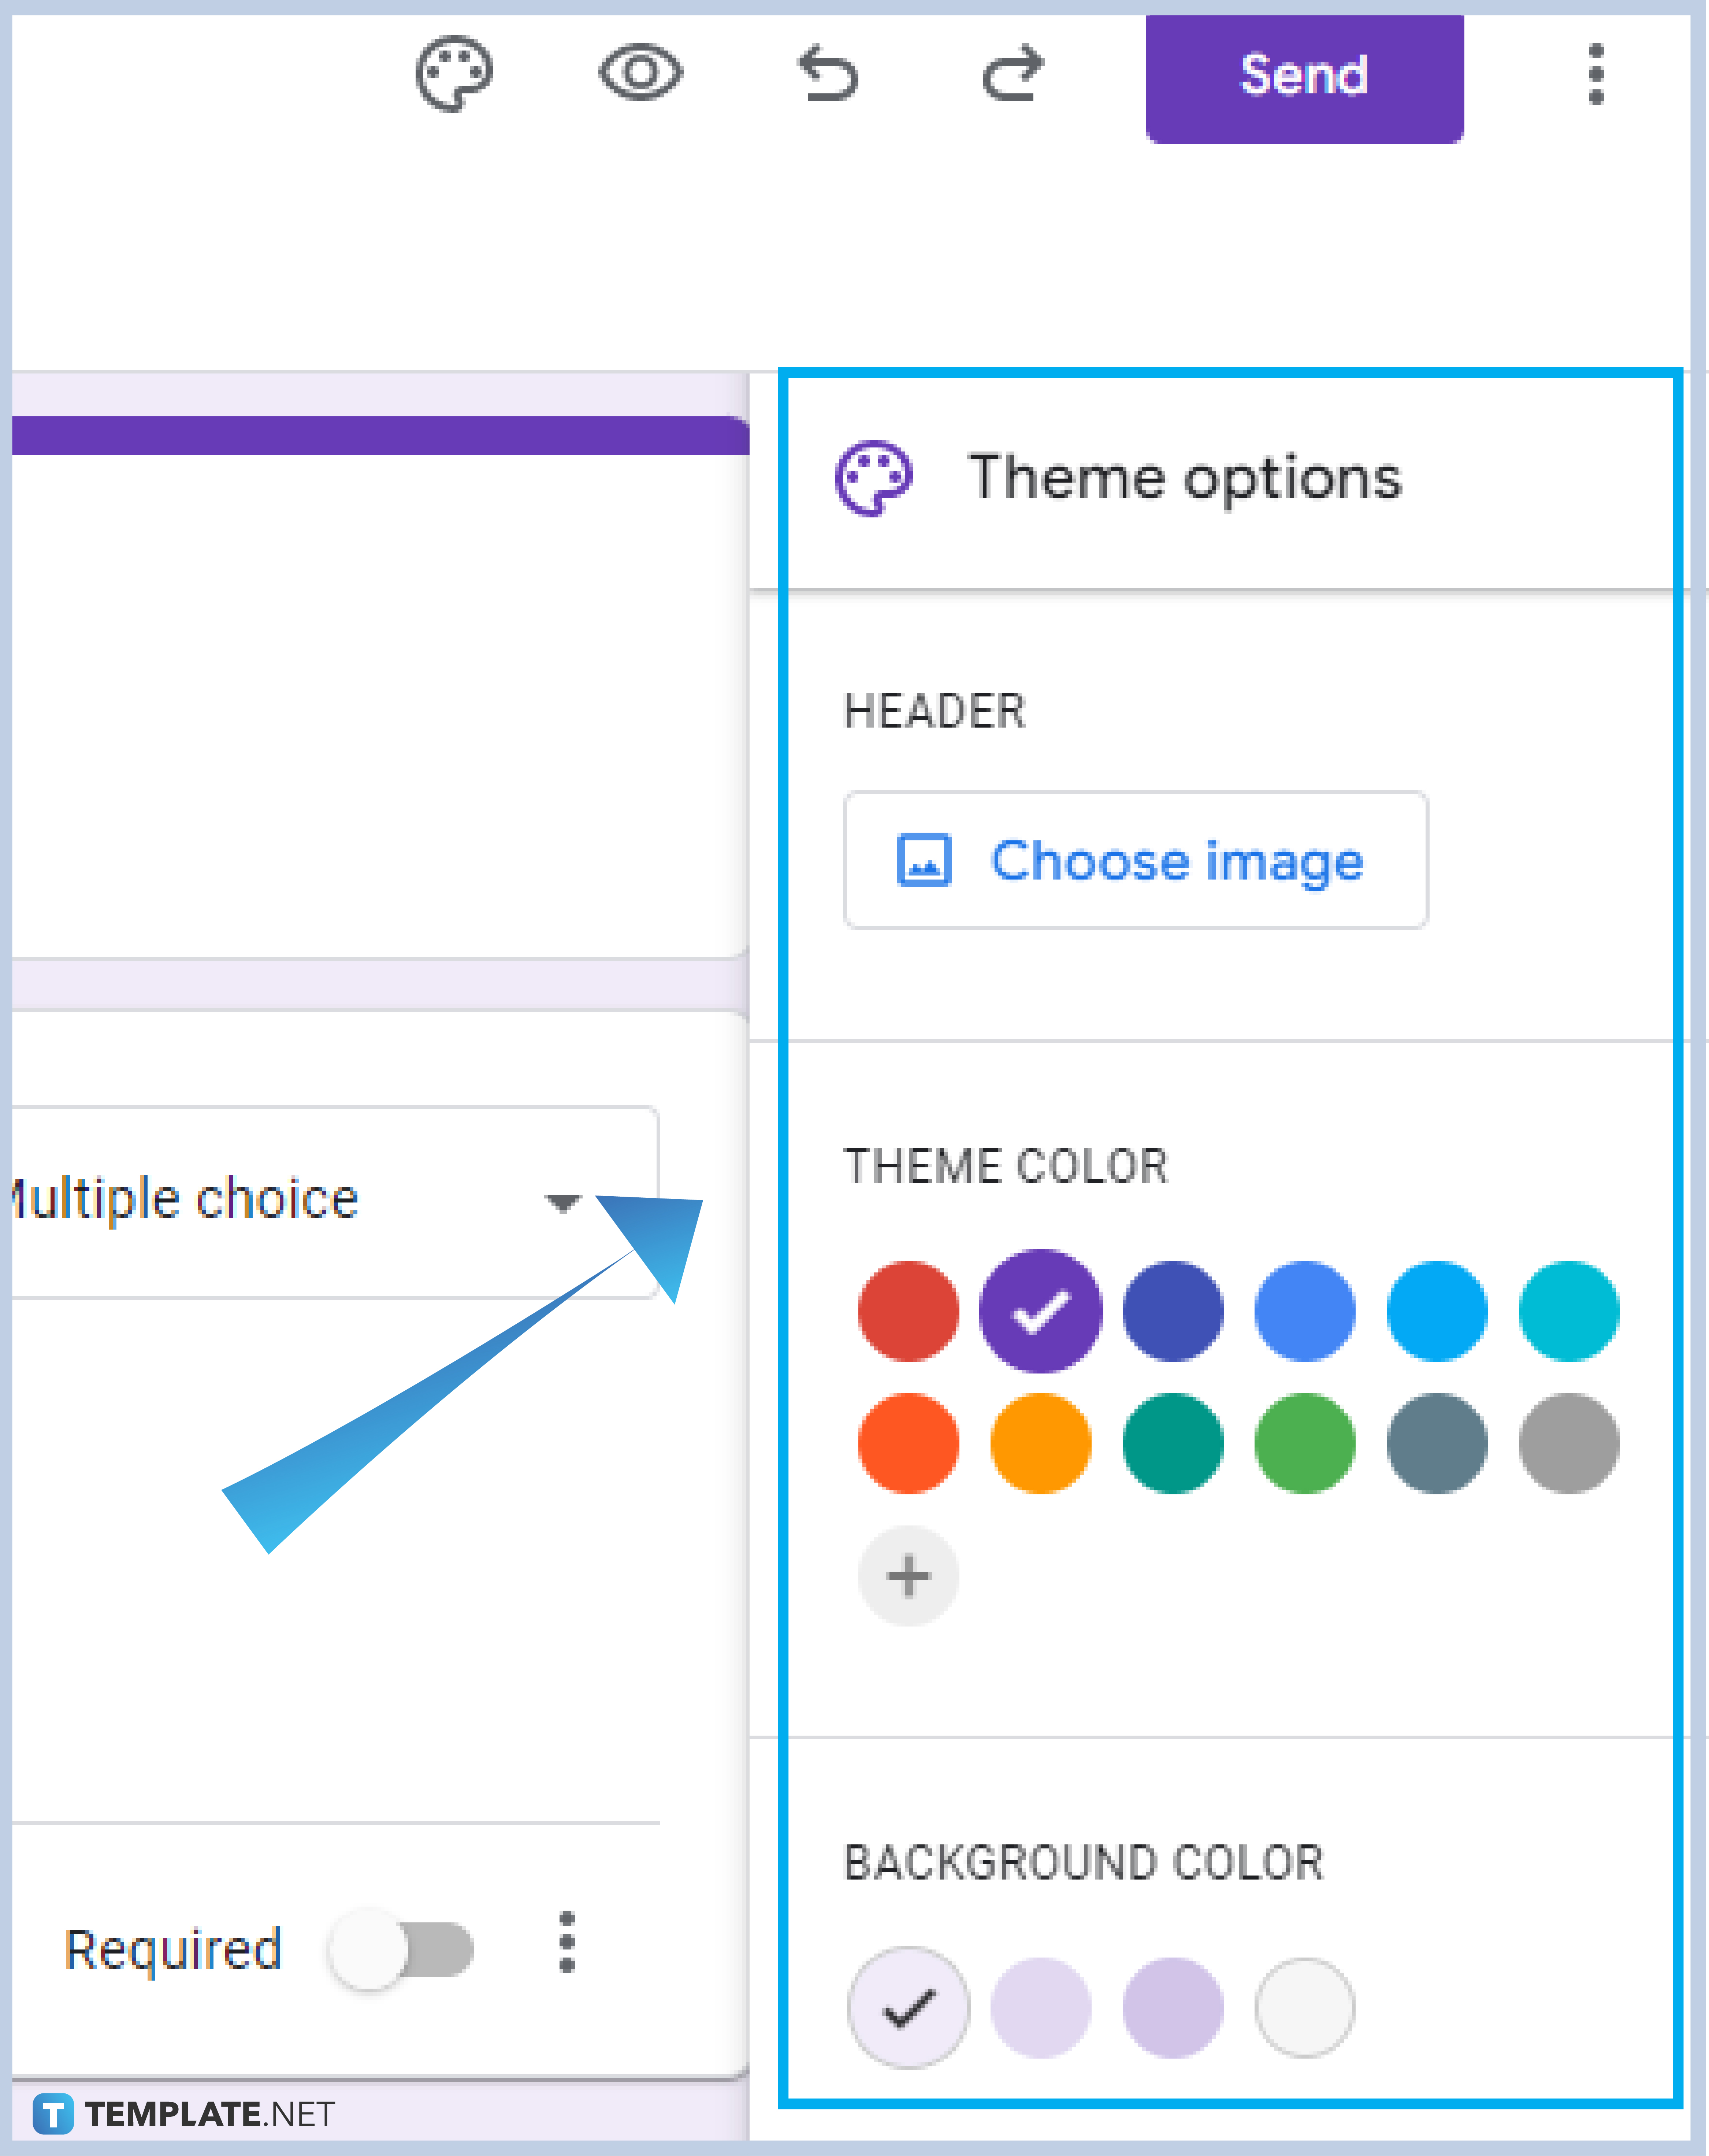 step 5 customize your form by adding colors and choosing themes 0